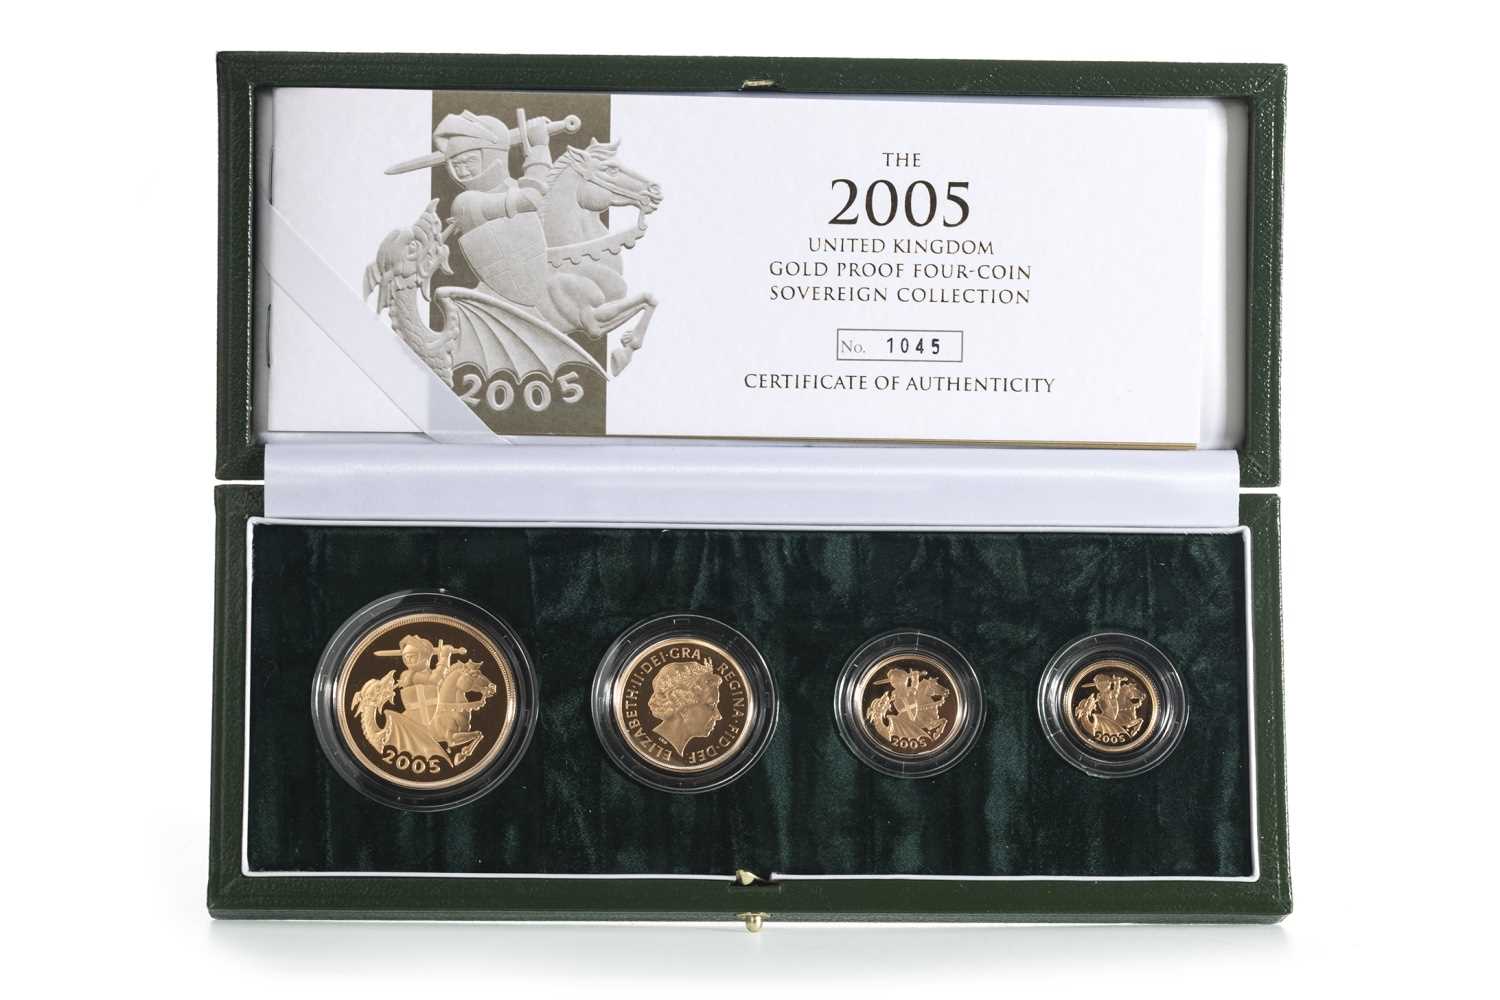 Lot 34 - 2005 GOLD PROOF UK SOVEREIGN COLLECTION FOUR COIN SET